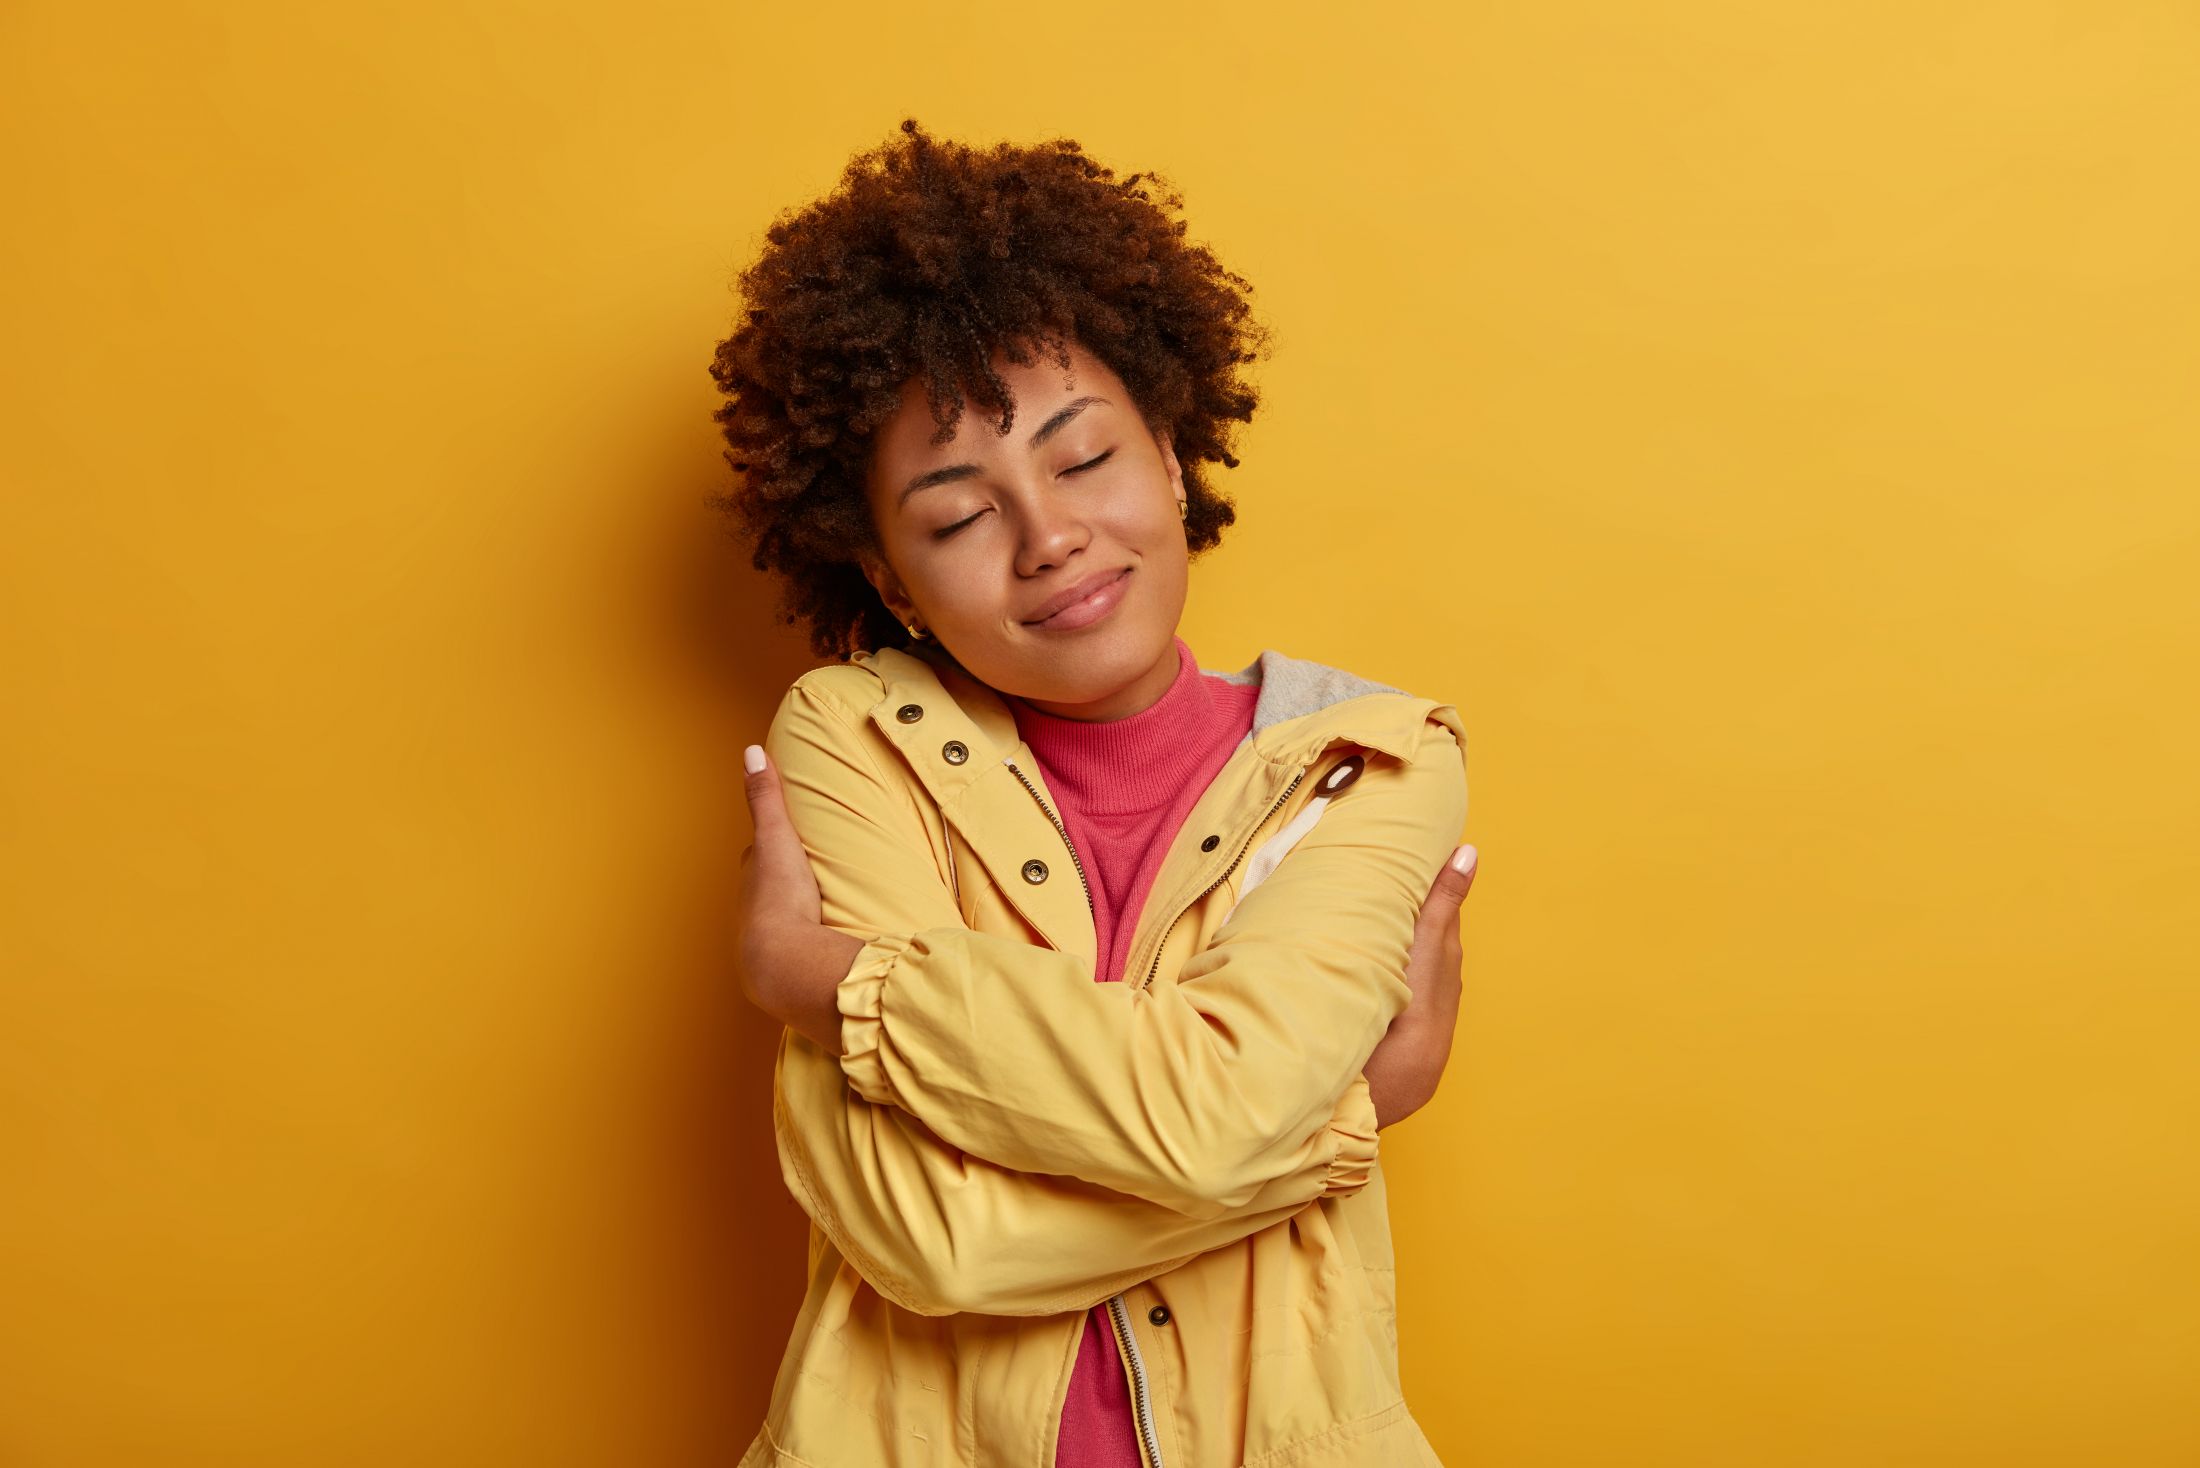 selfishness-and-self-love-concept-portrait-of-pleased-dark-skinned-curly-female-model-hugs-herself-crosses-hands-over-body-keeps-eyes-closed-wears-jacket-poses-against-yellow-wall.jpg